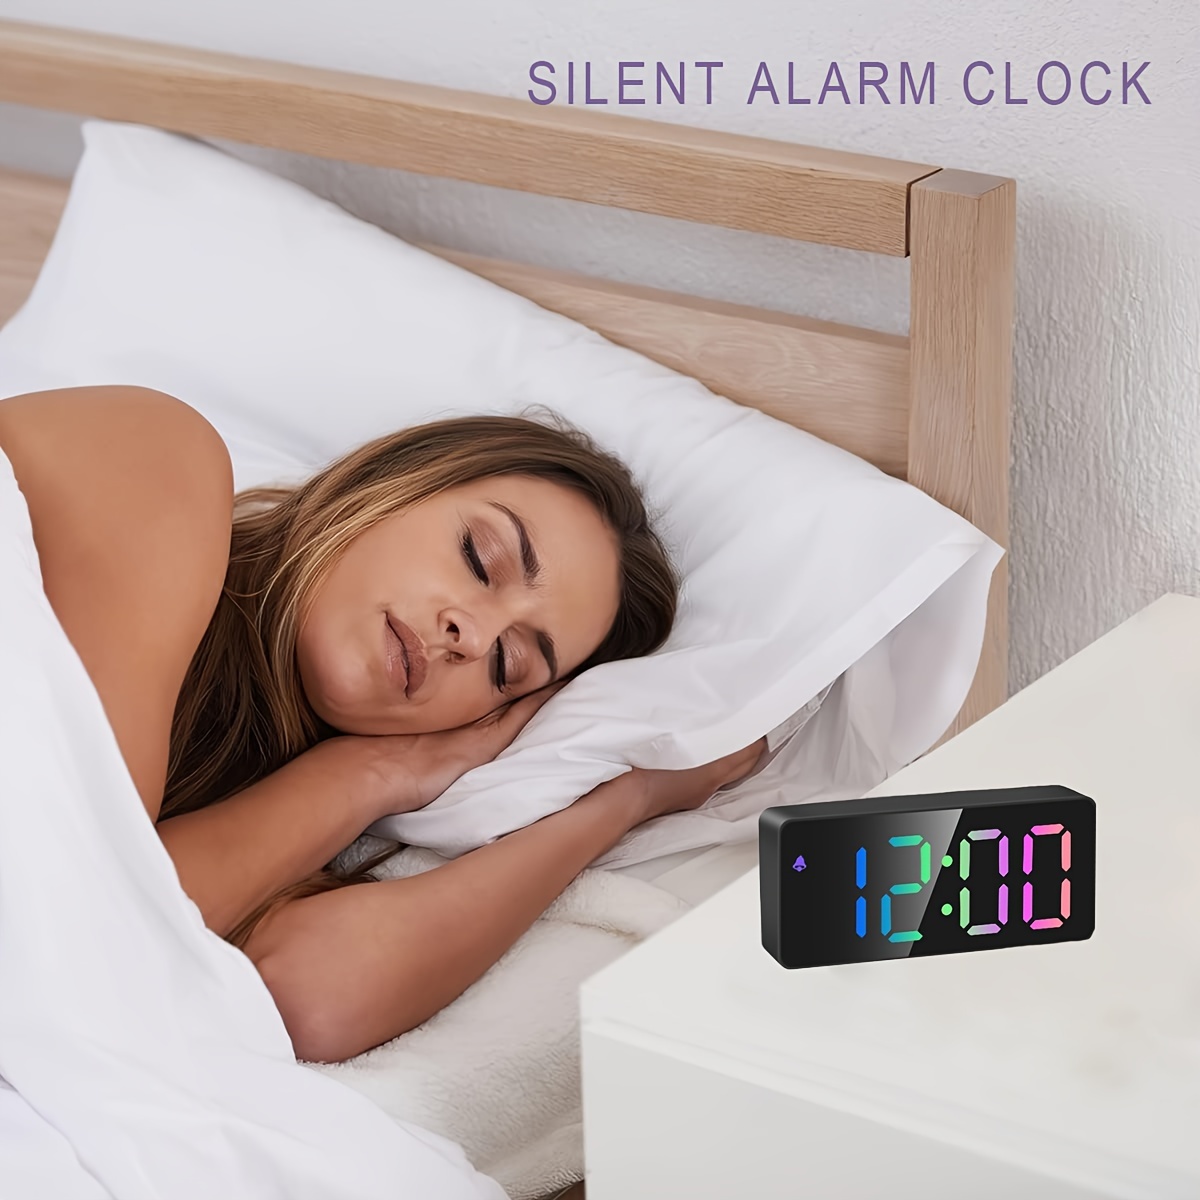 Digital Clock with Nap Timer, Snooze, Battery Powered and USB